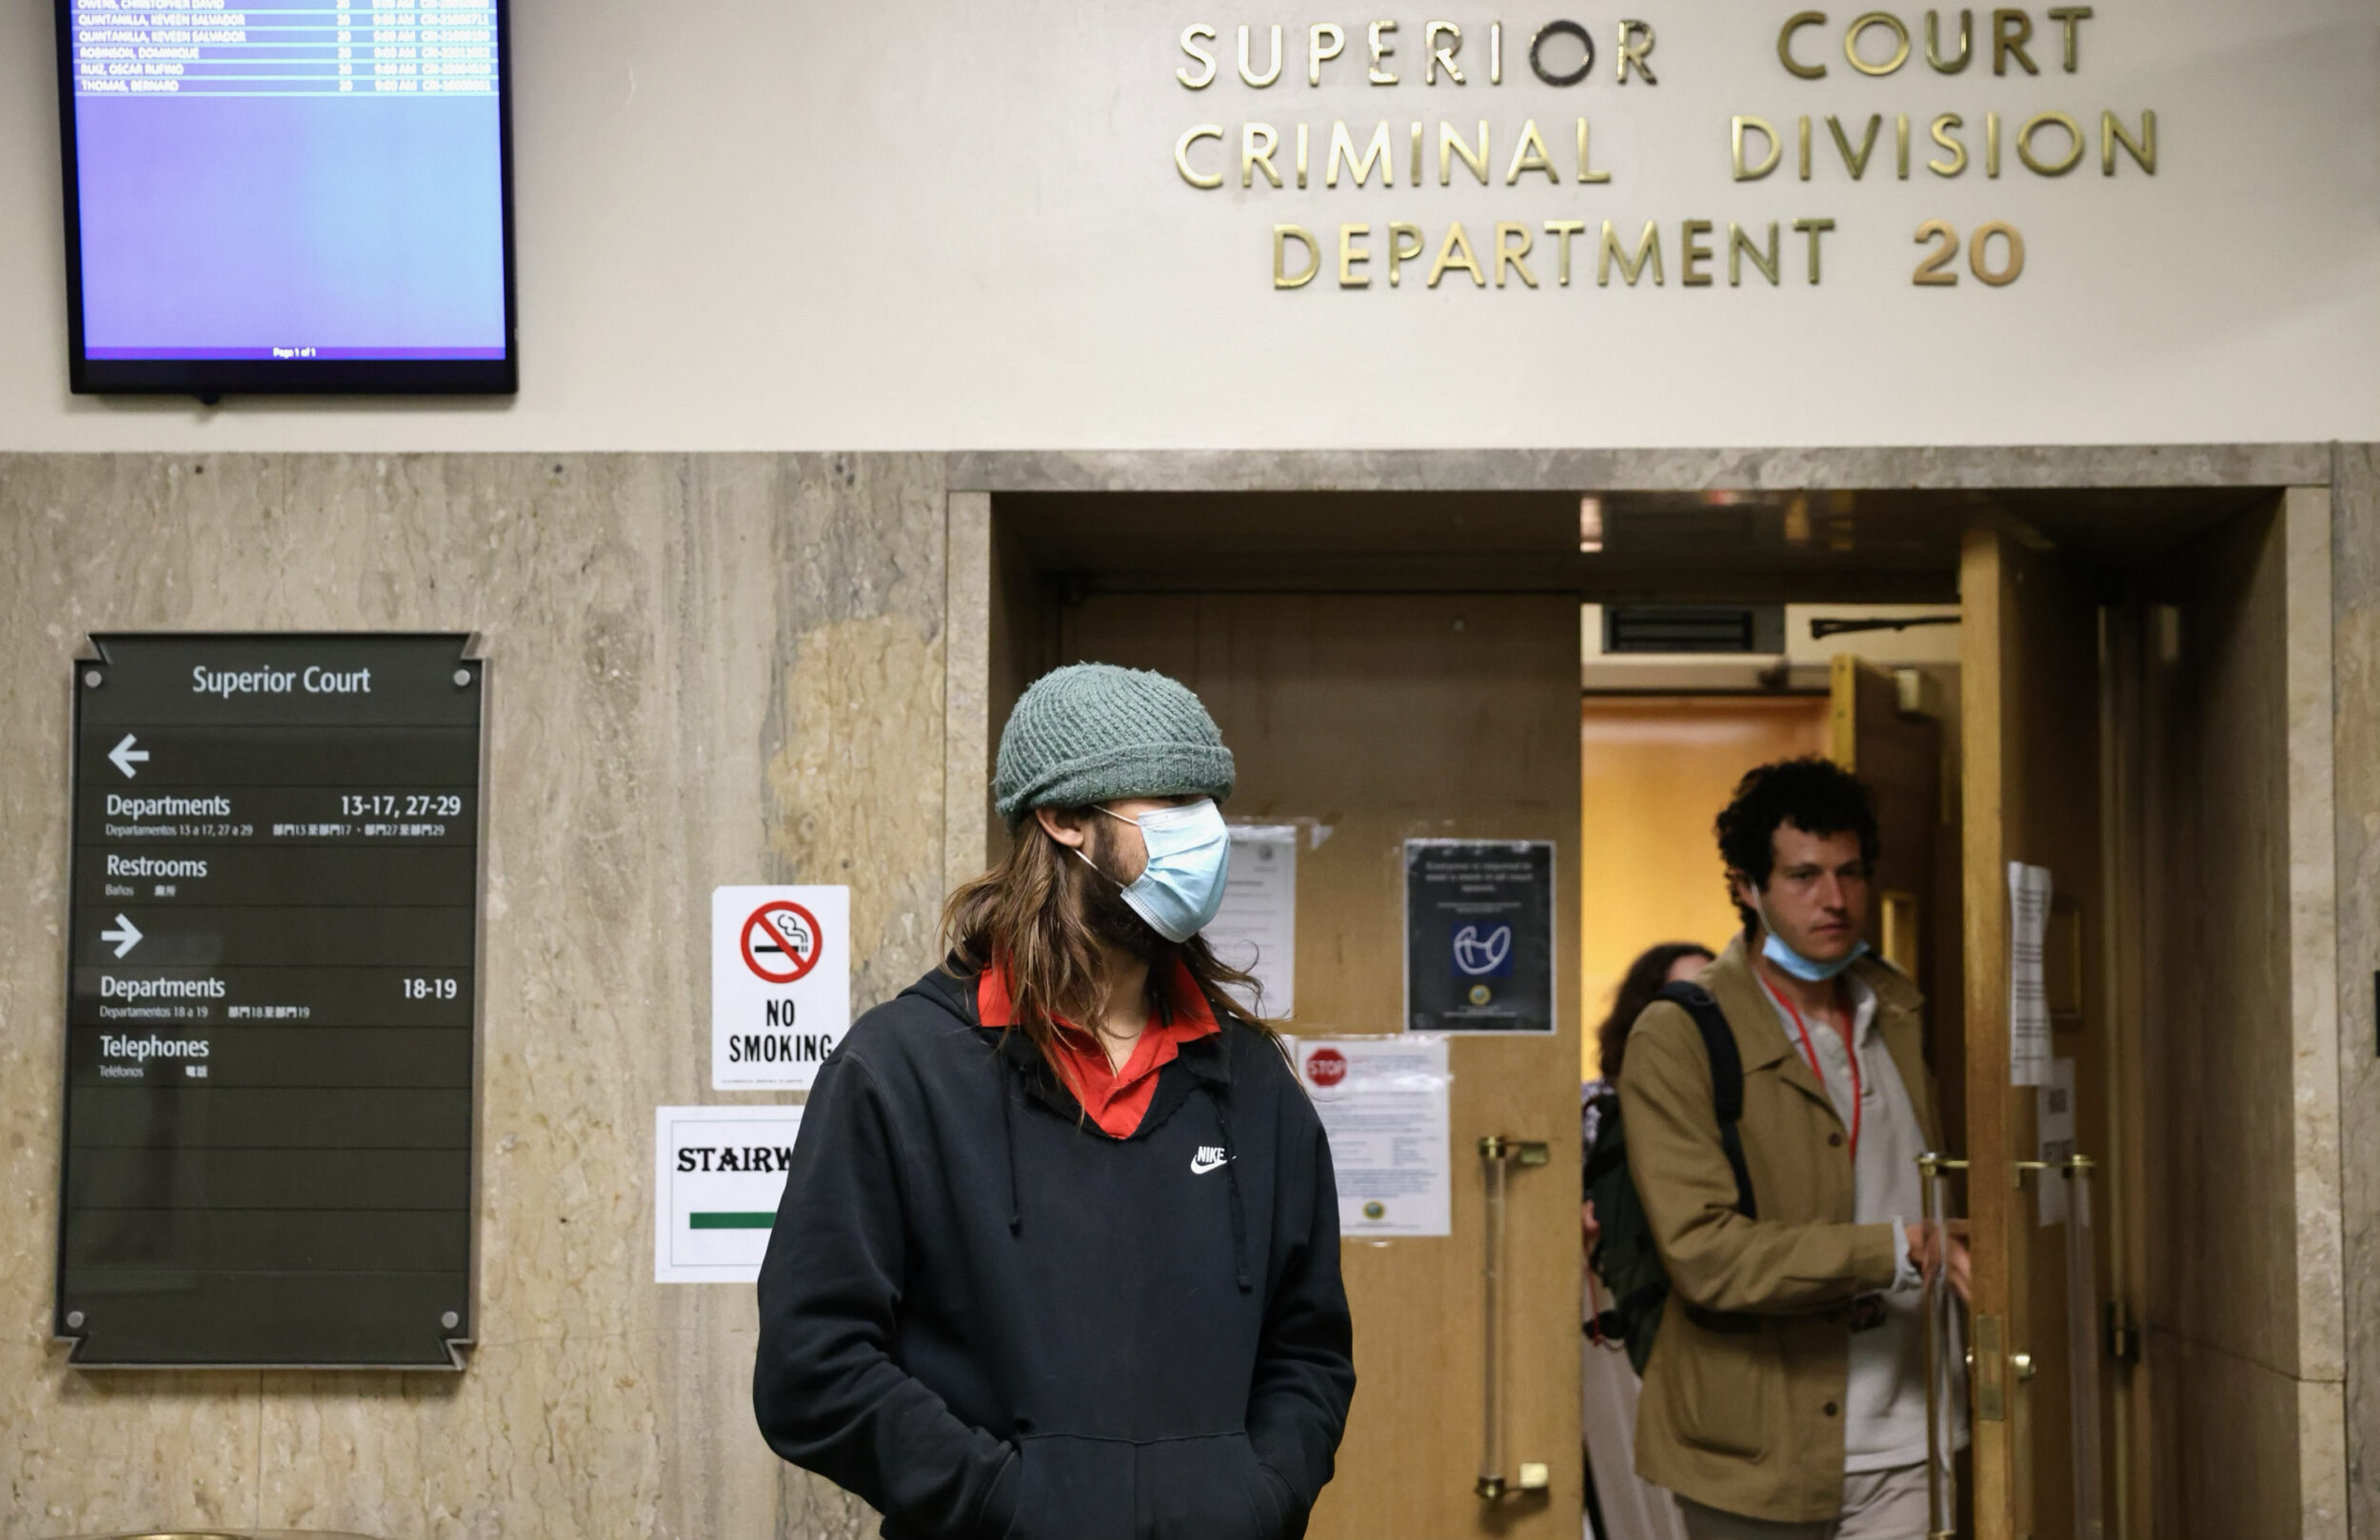 Two people stand near the entrance of a courtroom, one wearing a mask, with signage above and beside them.